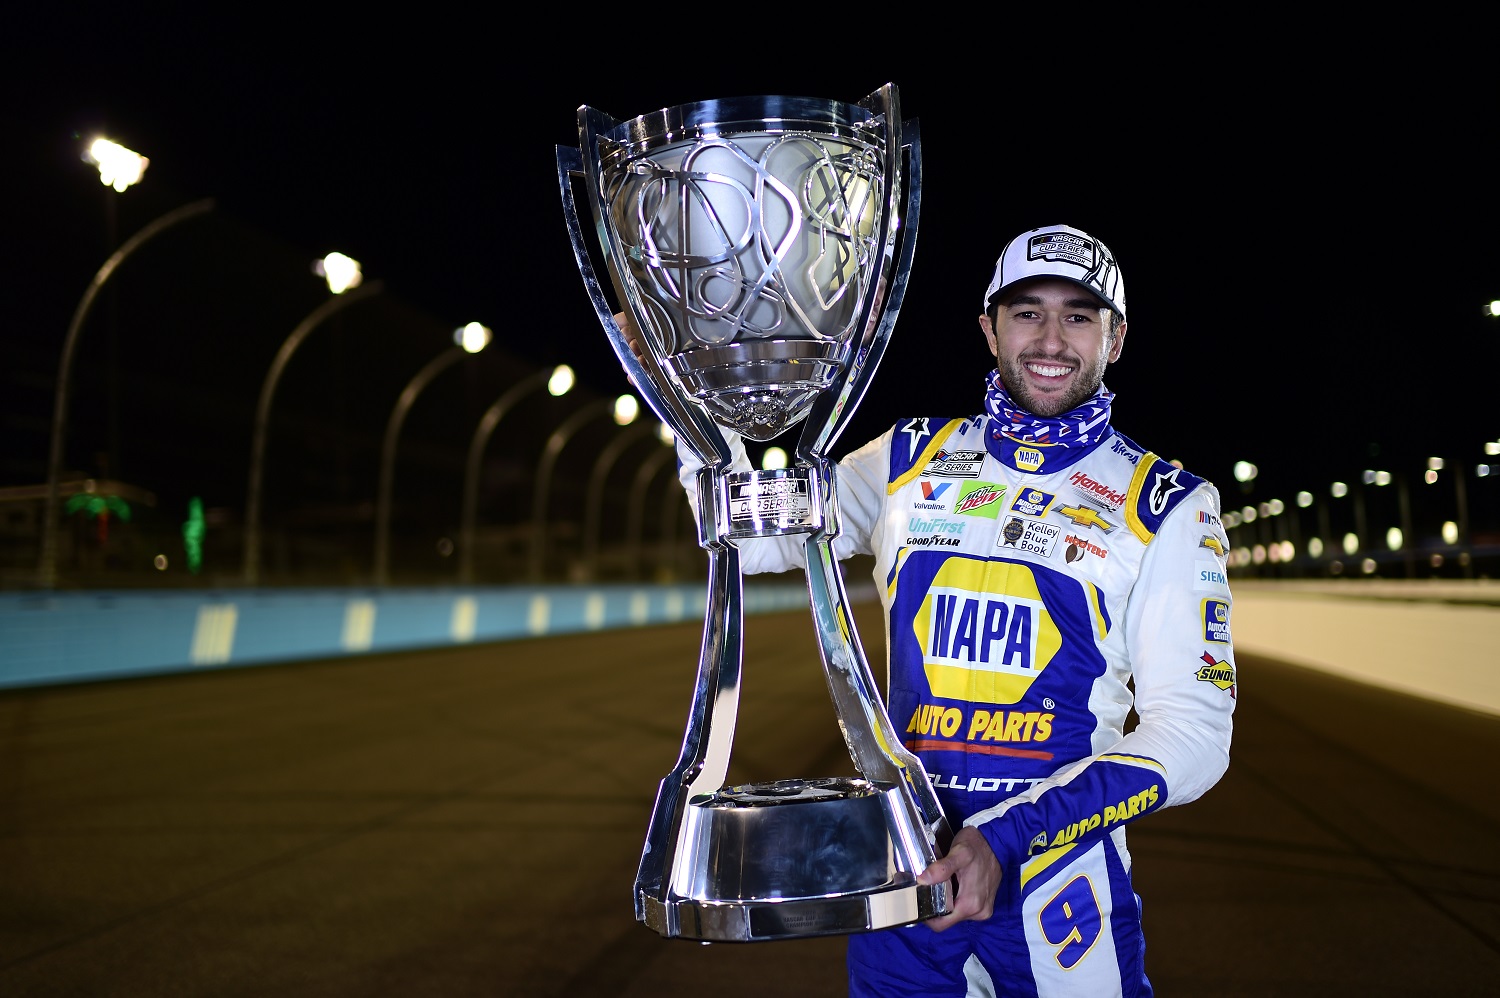 Chase Elliott poses for photos after winning the NASCAR Cup Series crown at Phoenix Raceway on Nov. 8, 2020.